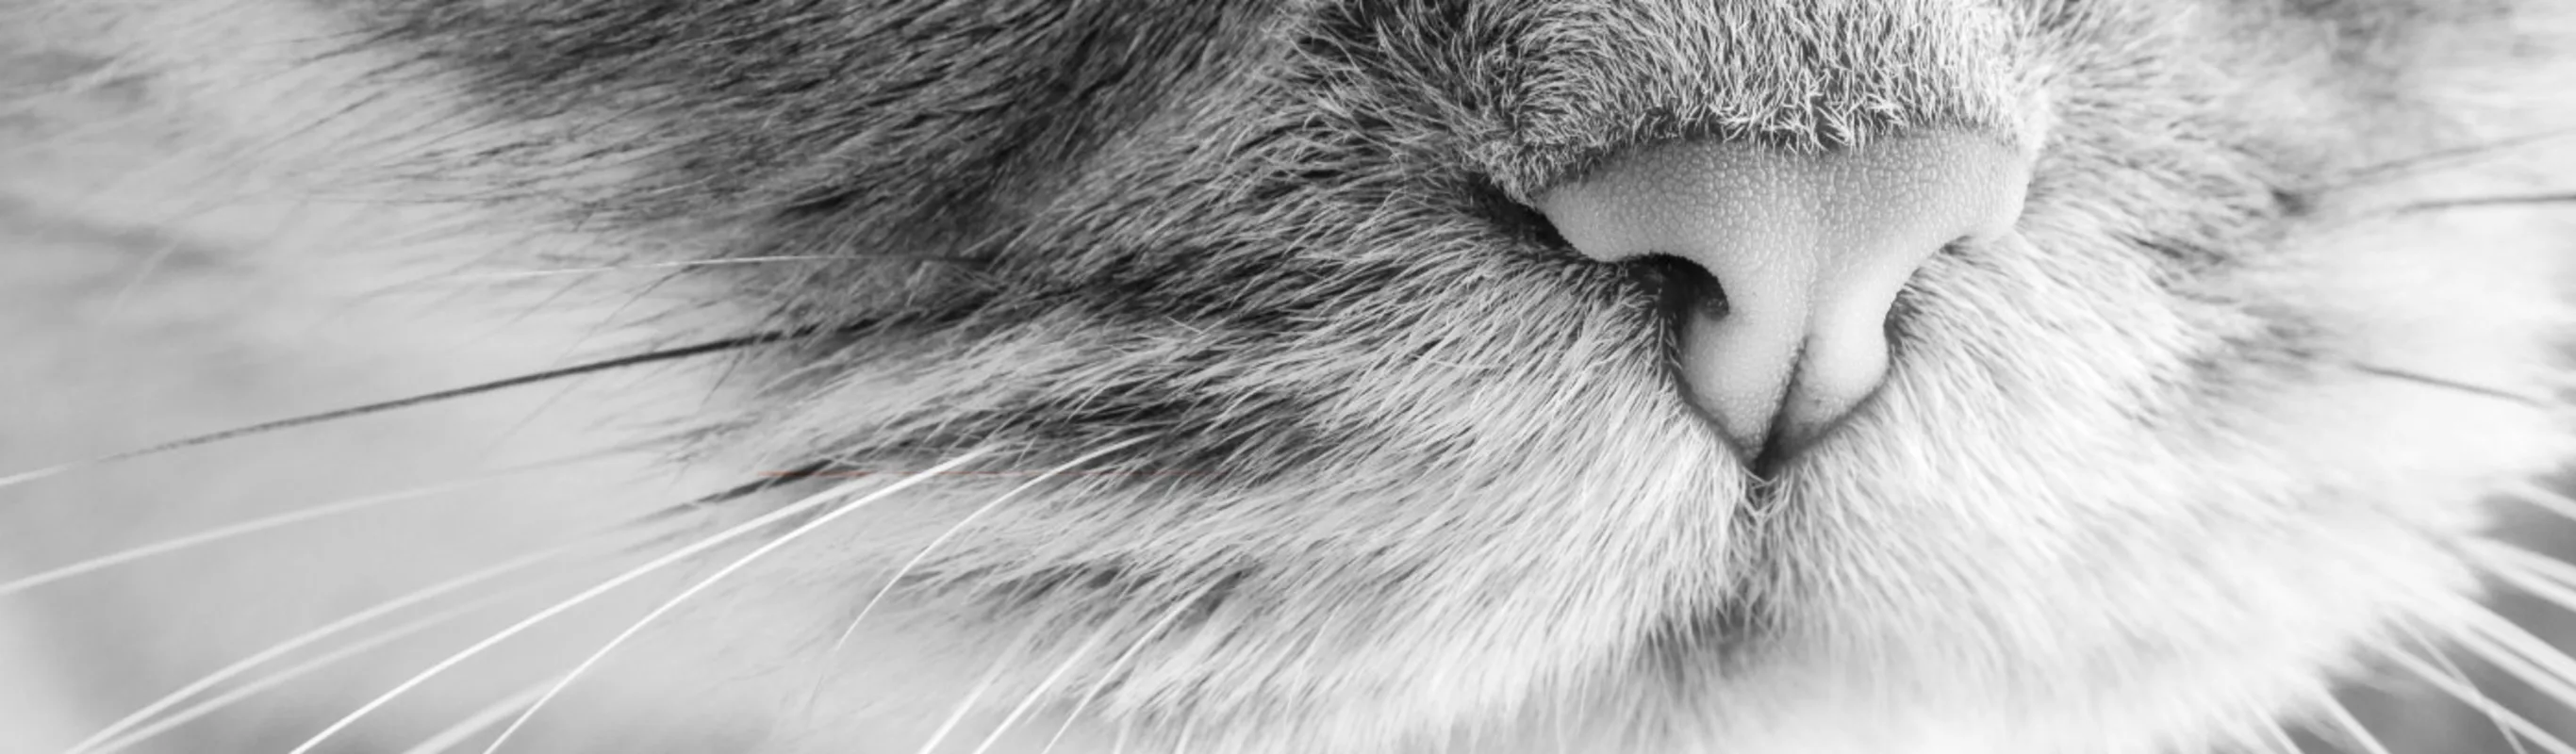 A close up view of a cat's nose and whiskers